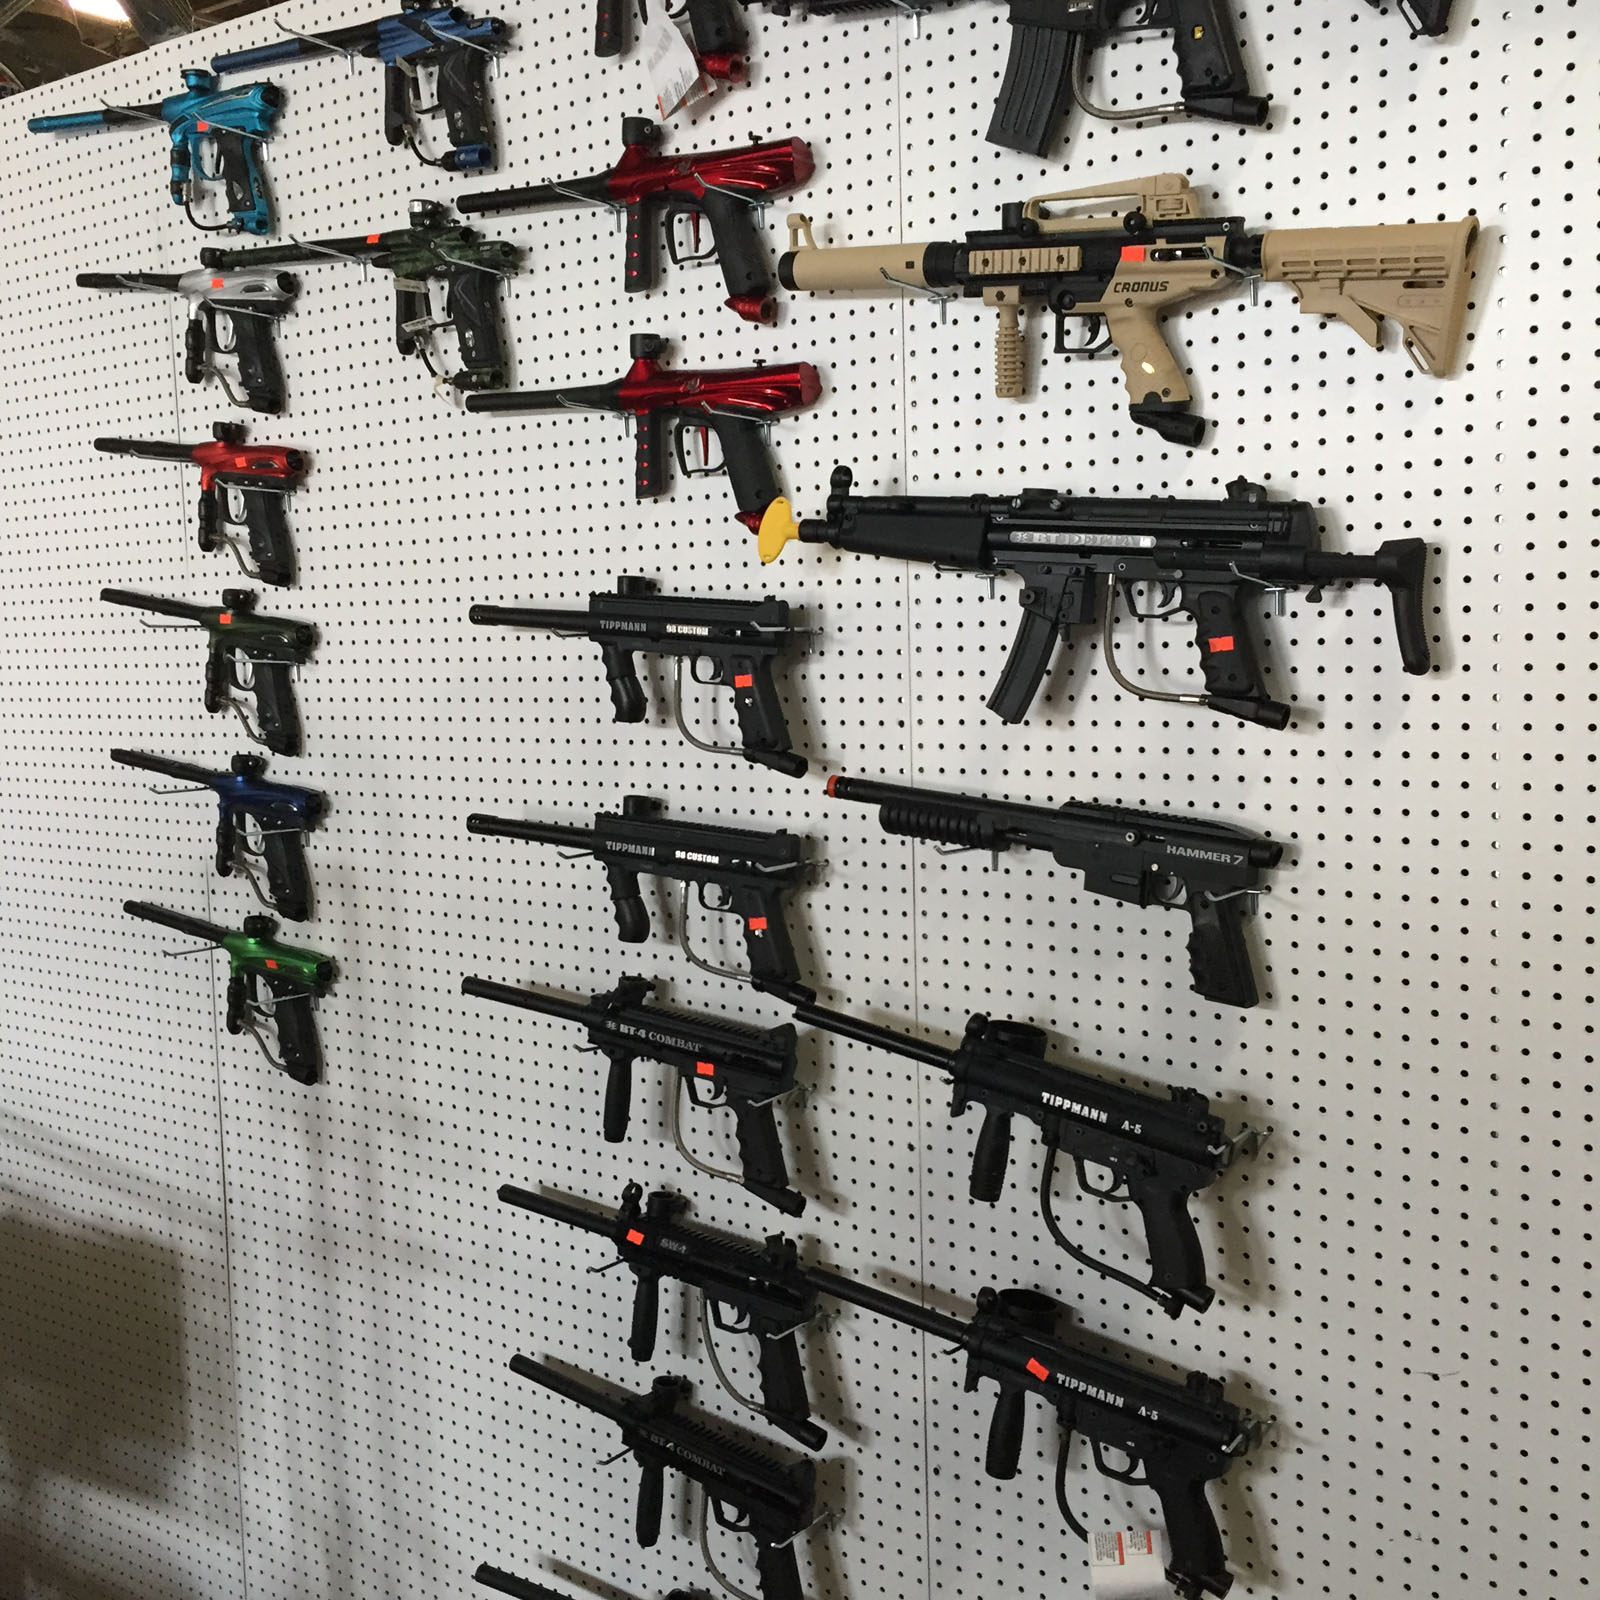 Airsoft Store - Airsoft Guns and Equipment For Sale